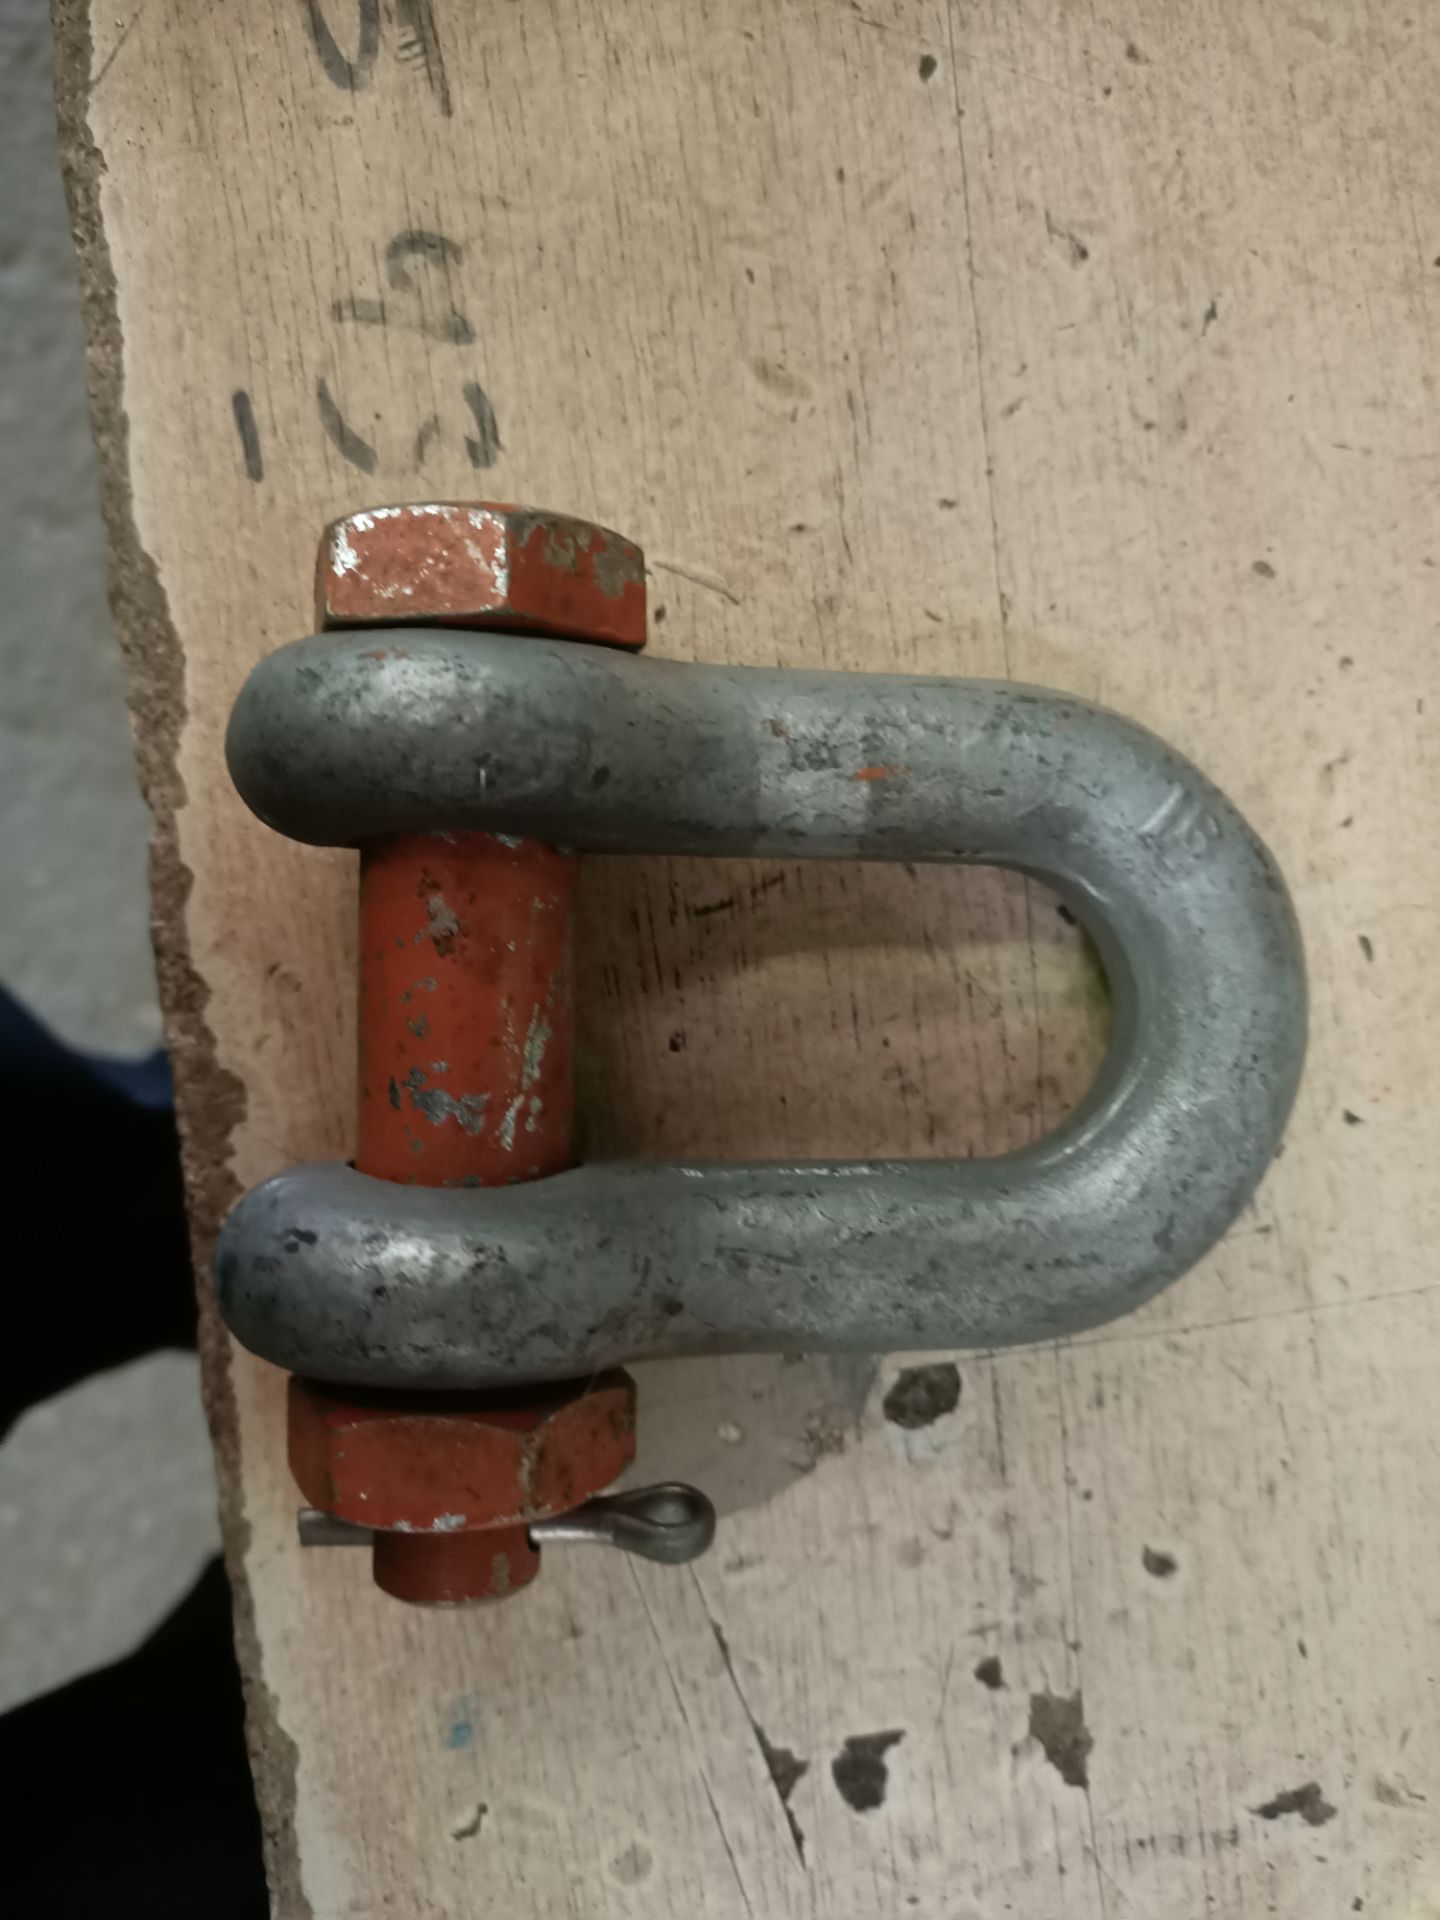 12 x 9.5 ton orange pin safety dee shackles (opsad9.5)